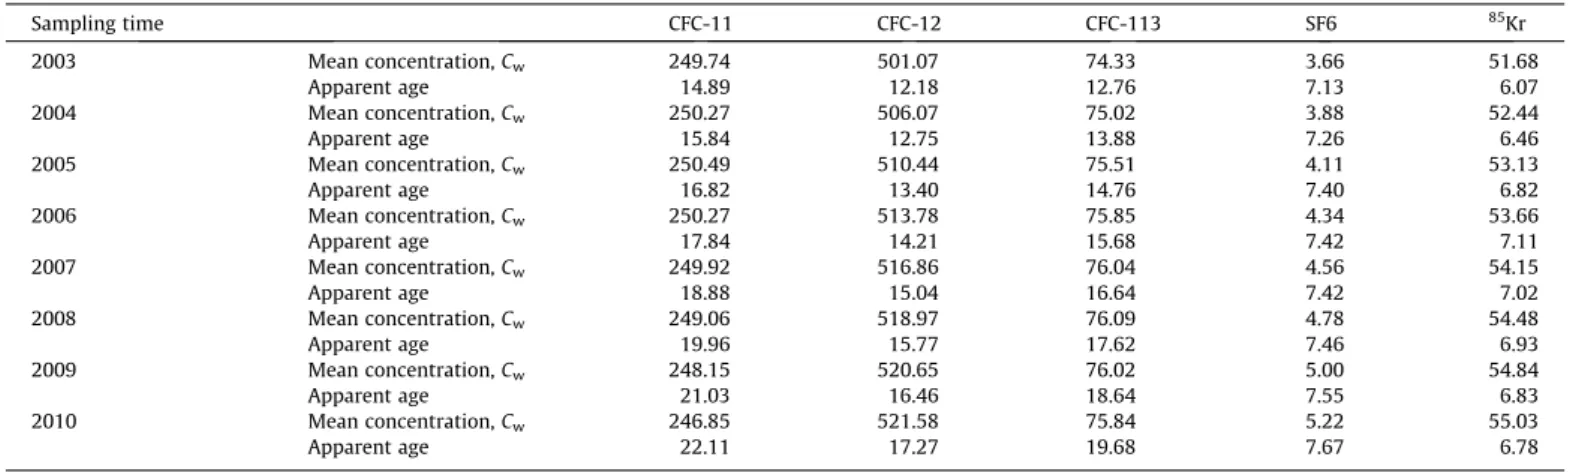 Table 2 synthesizes the mean concentration, C w of the five dif- dif-ferent tracers used in this study and apparent ages for each tracer at each year